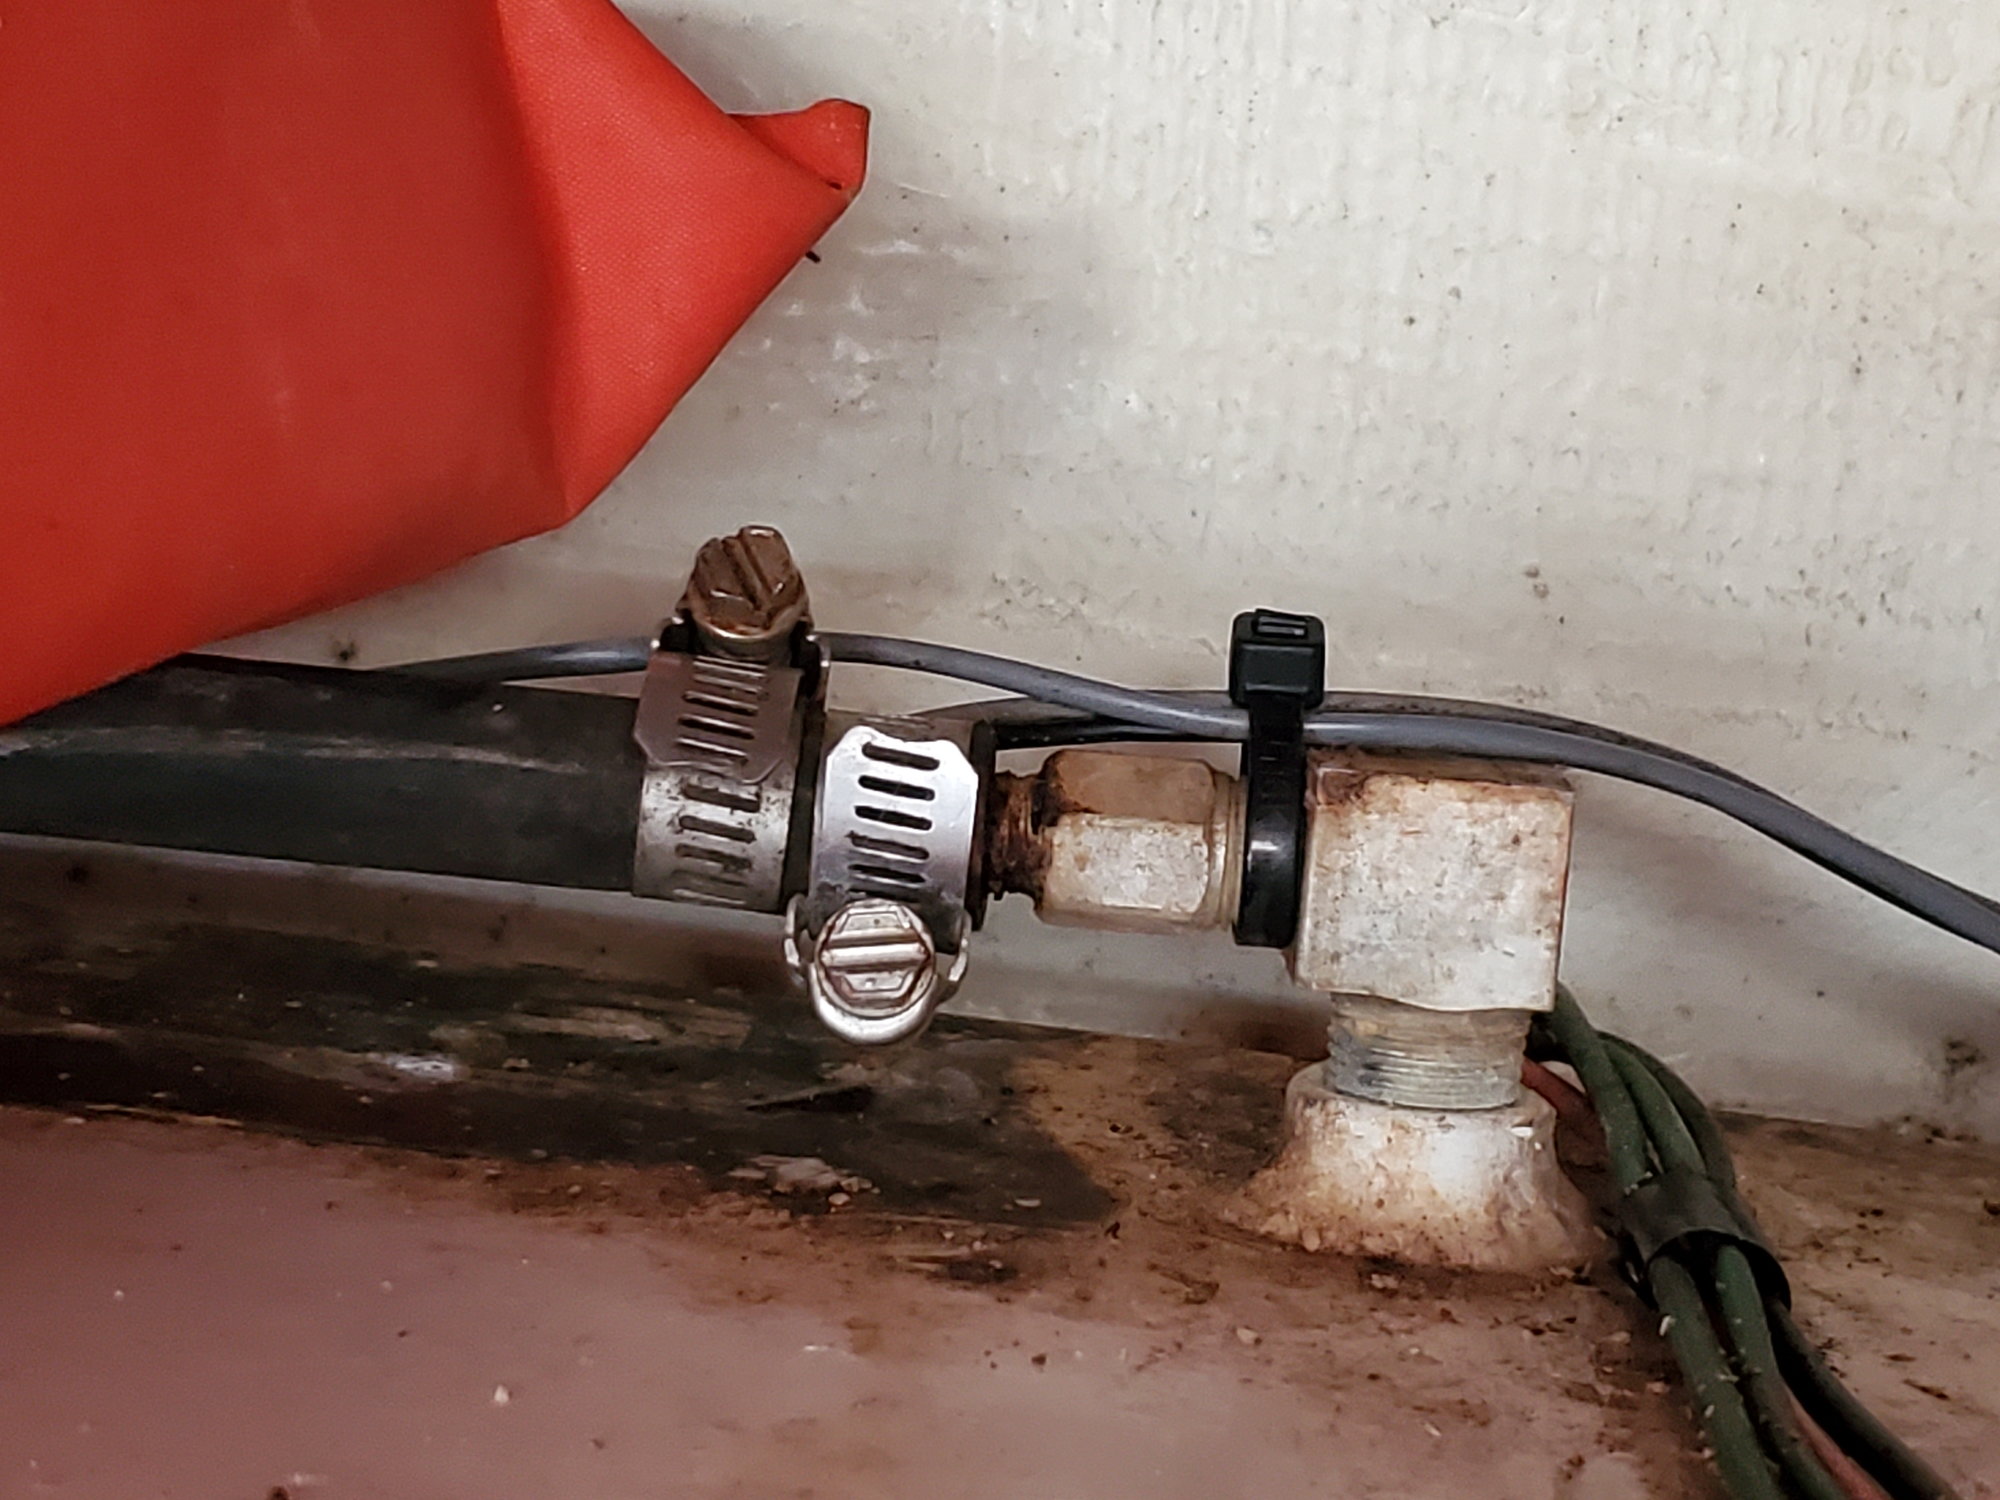 Anti siphon valve question [issue with gas tank] - The Hull Truth